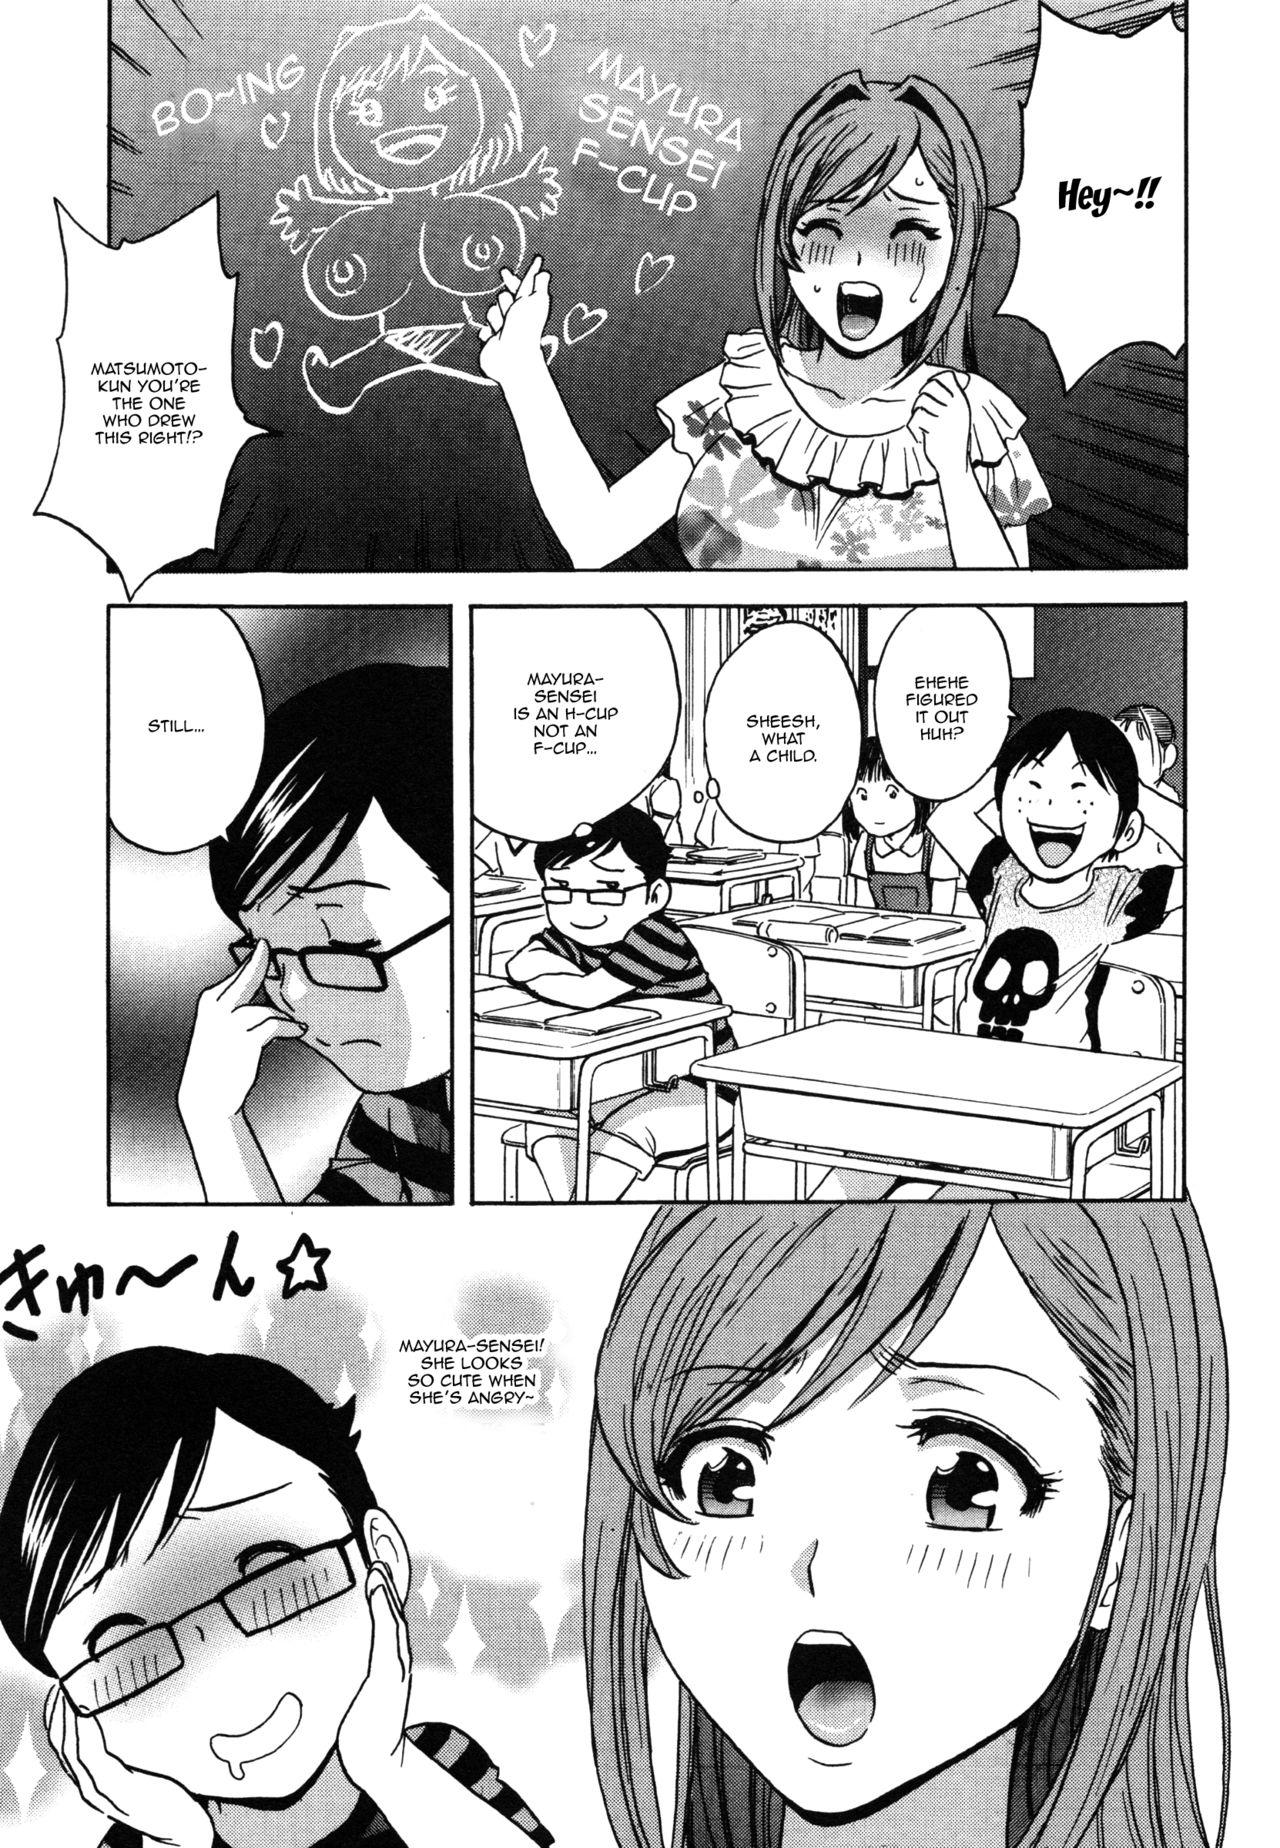 Ryoujyoku!! Urechichi Paradise Ch. 6 | Become a Kid and Have Sex All the Time! Part 6 4